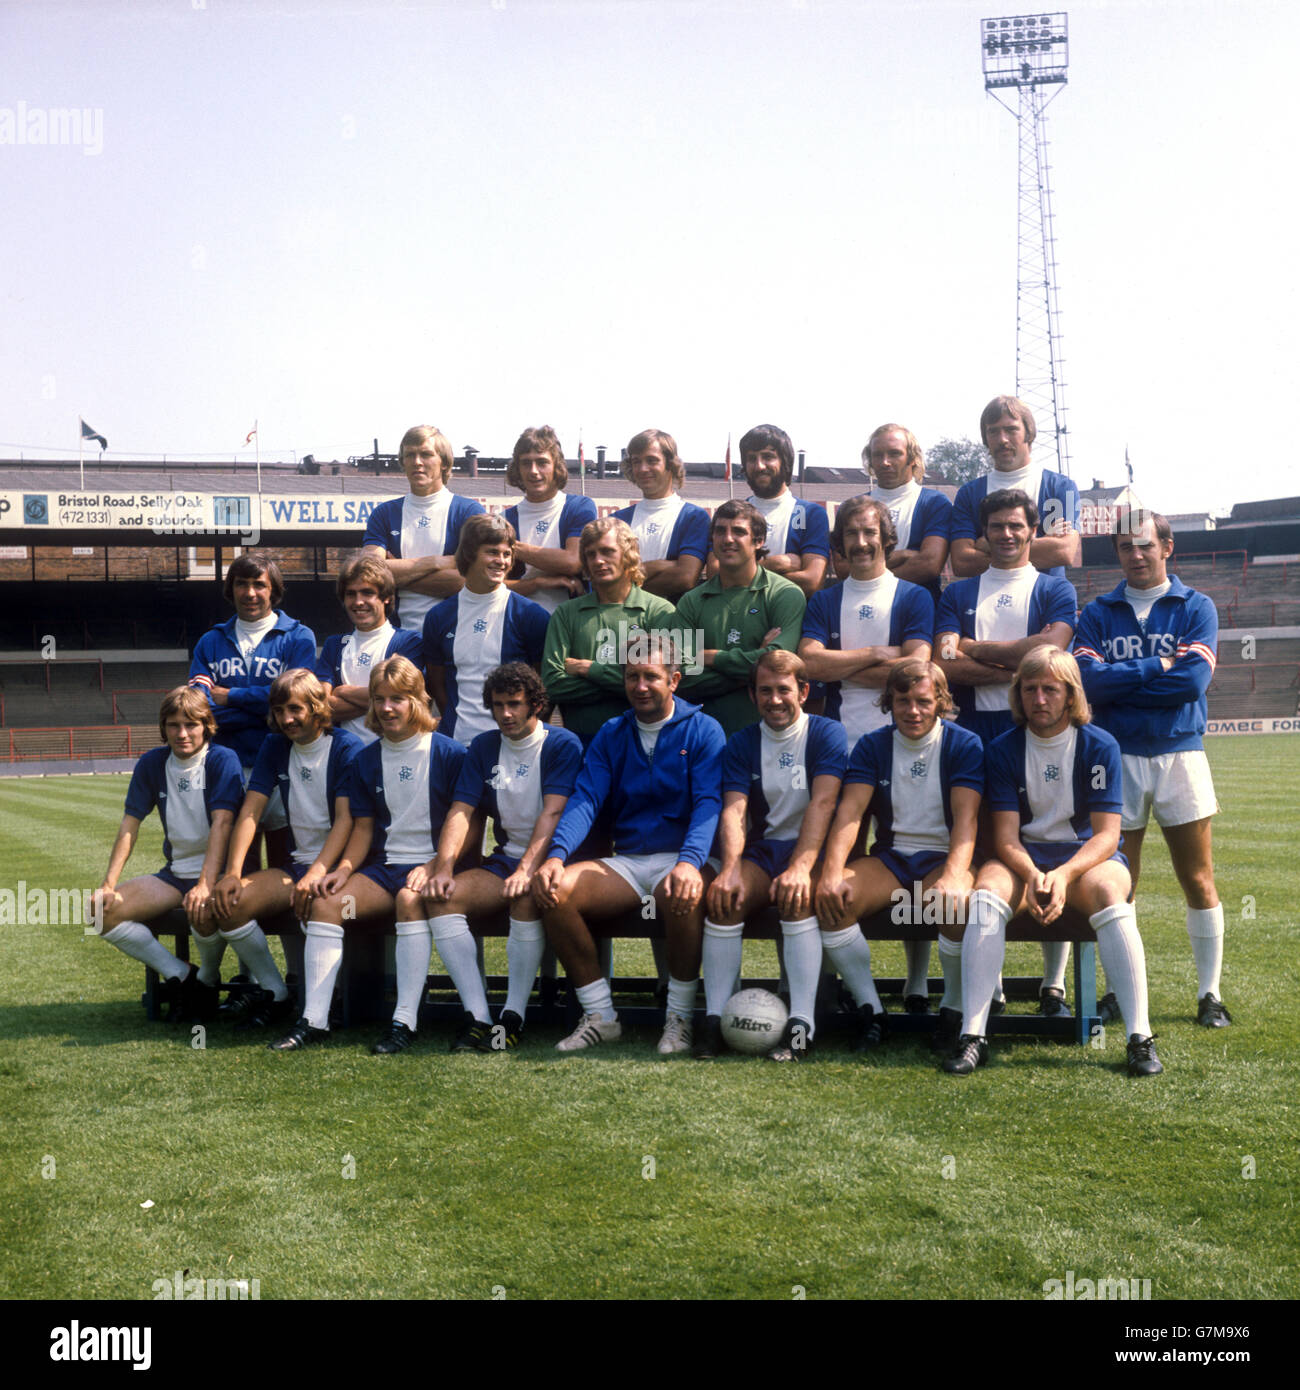 Birmingham City squad for the 1975-76 season. (top l-r) John Roberts, Trevor Francis, Archie Styles, Alan Campbell, Tony Want and Gary Pendrey. (middle row l-r) Willie Bell (trainer), Steve Bryant, Joe Gallagher, Gary Sprake, Dave Latchford, Bob Hatton, Roger Hynd and George Dalton (Trainer). (front l-r) Steve Phillips, Jimmy Calderwood, Paul Hendrie, Malcolm Page, Freddie Goodwin (Manager), Howard Kendall, Gordon Taylor and Kenny Burns. Stock Photo